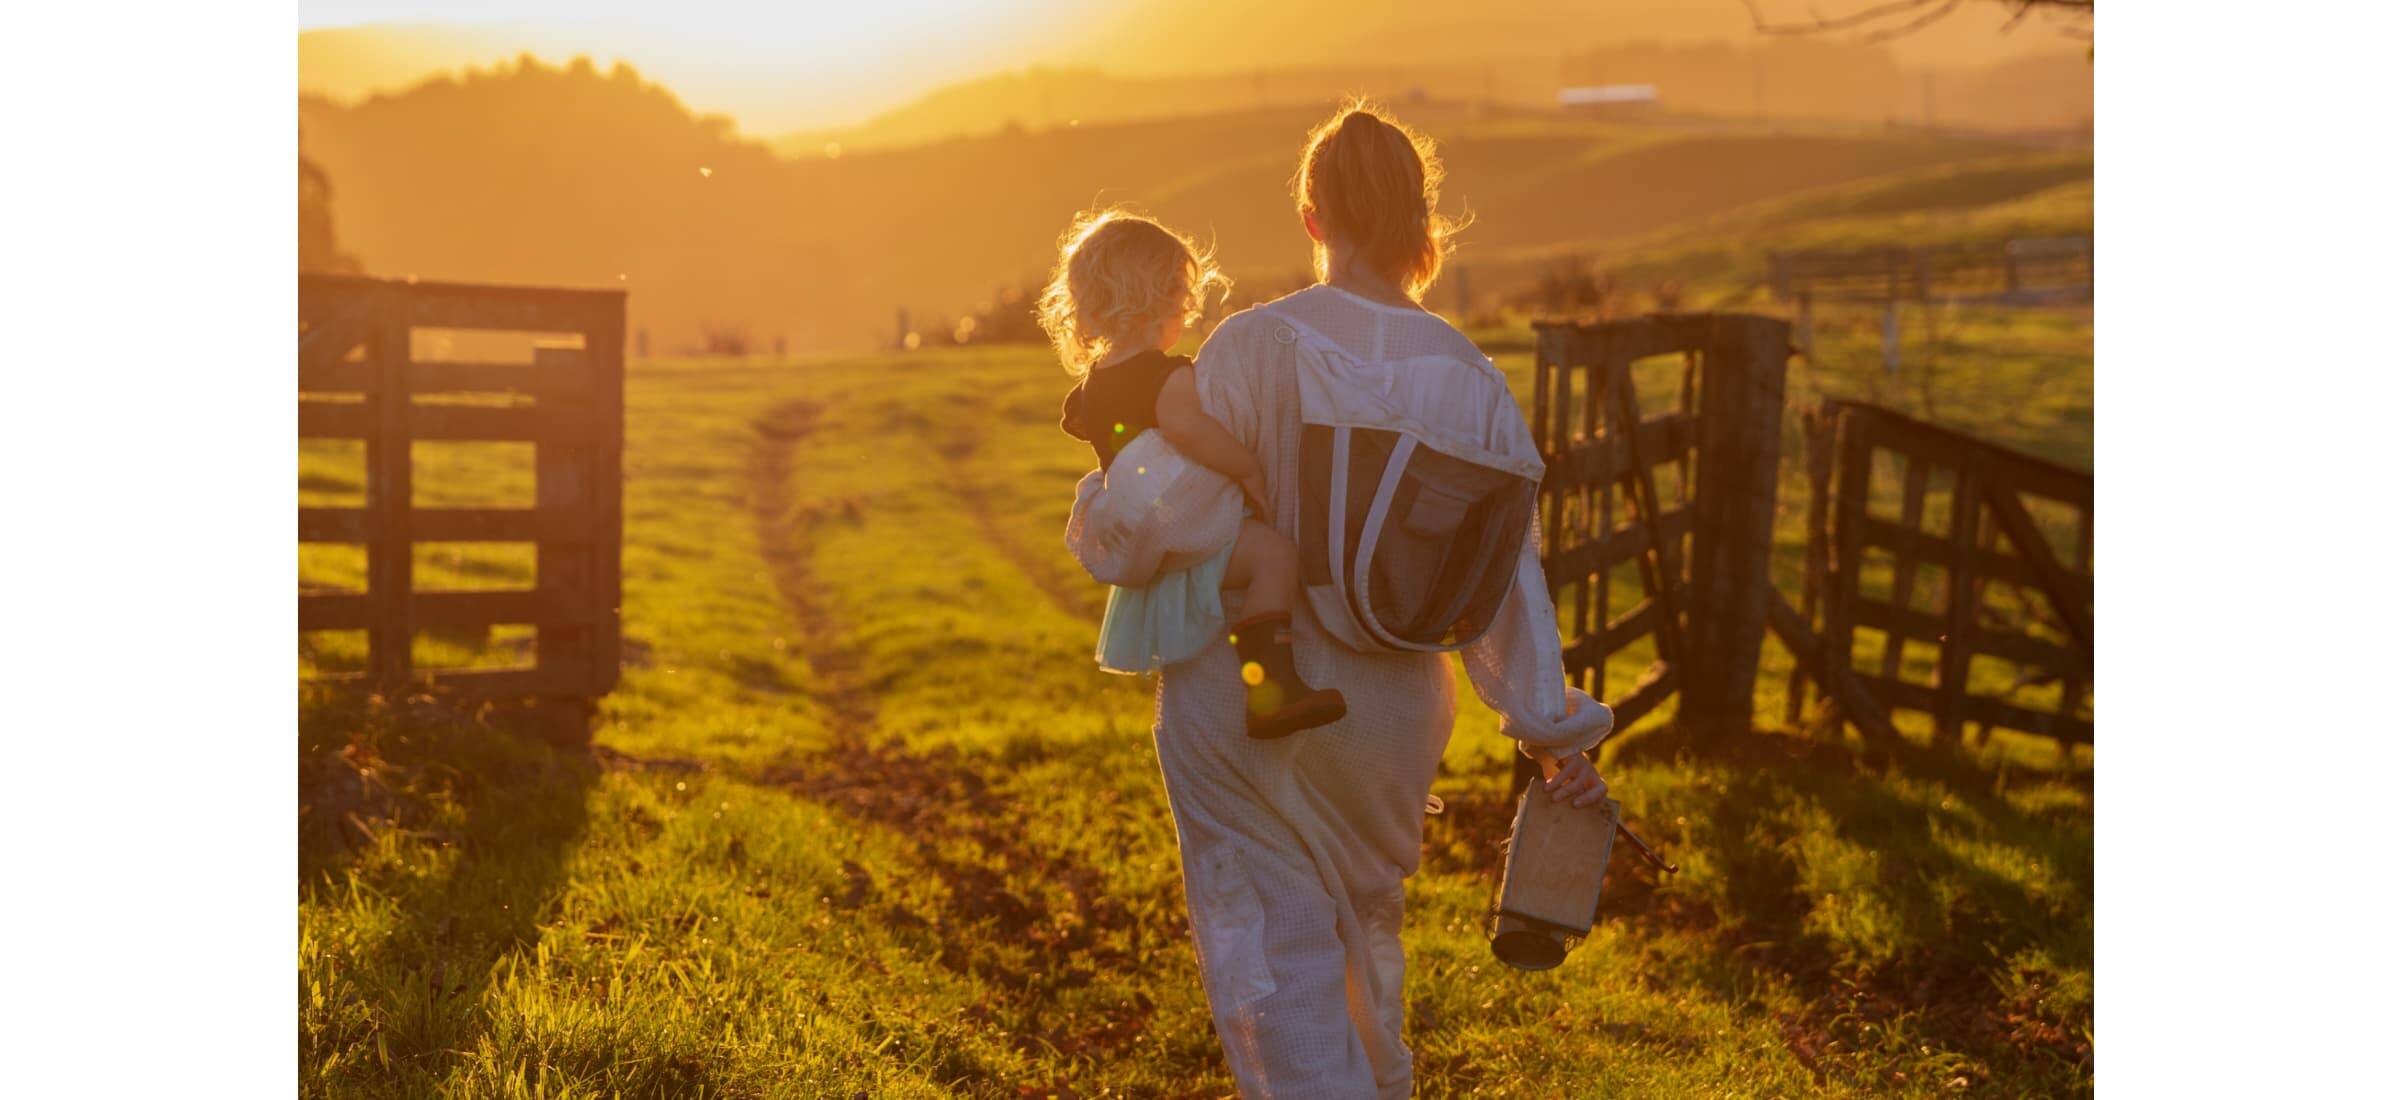 Hannah O’Brien walking through a farm gate at sunset, wearing a bee protection suit and carrying a toddler on her hip.